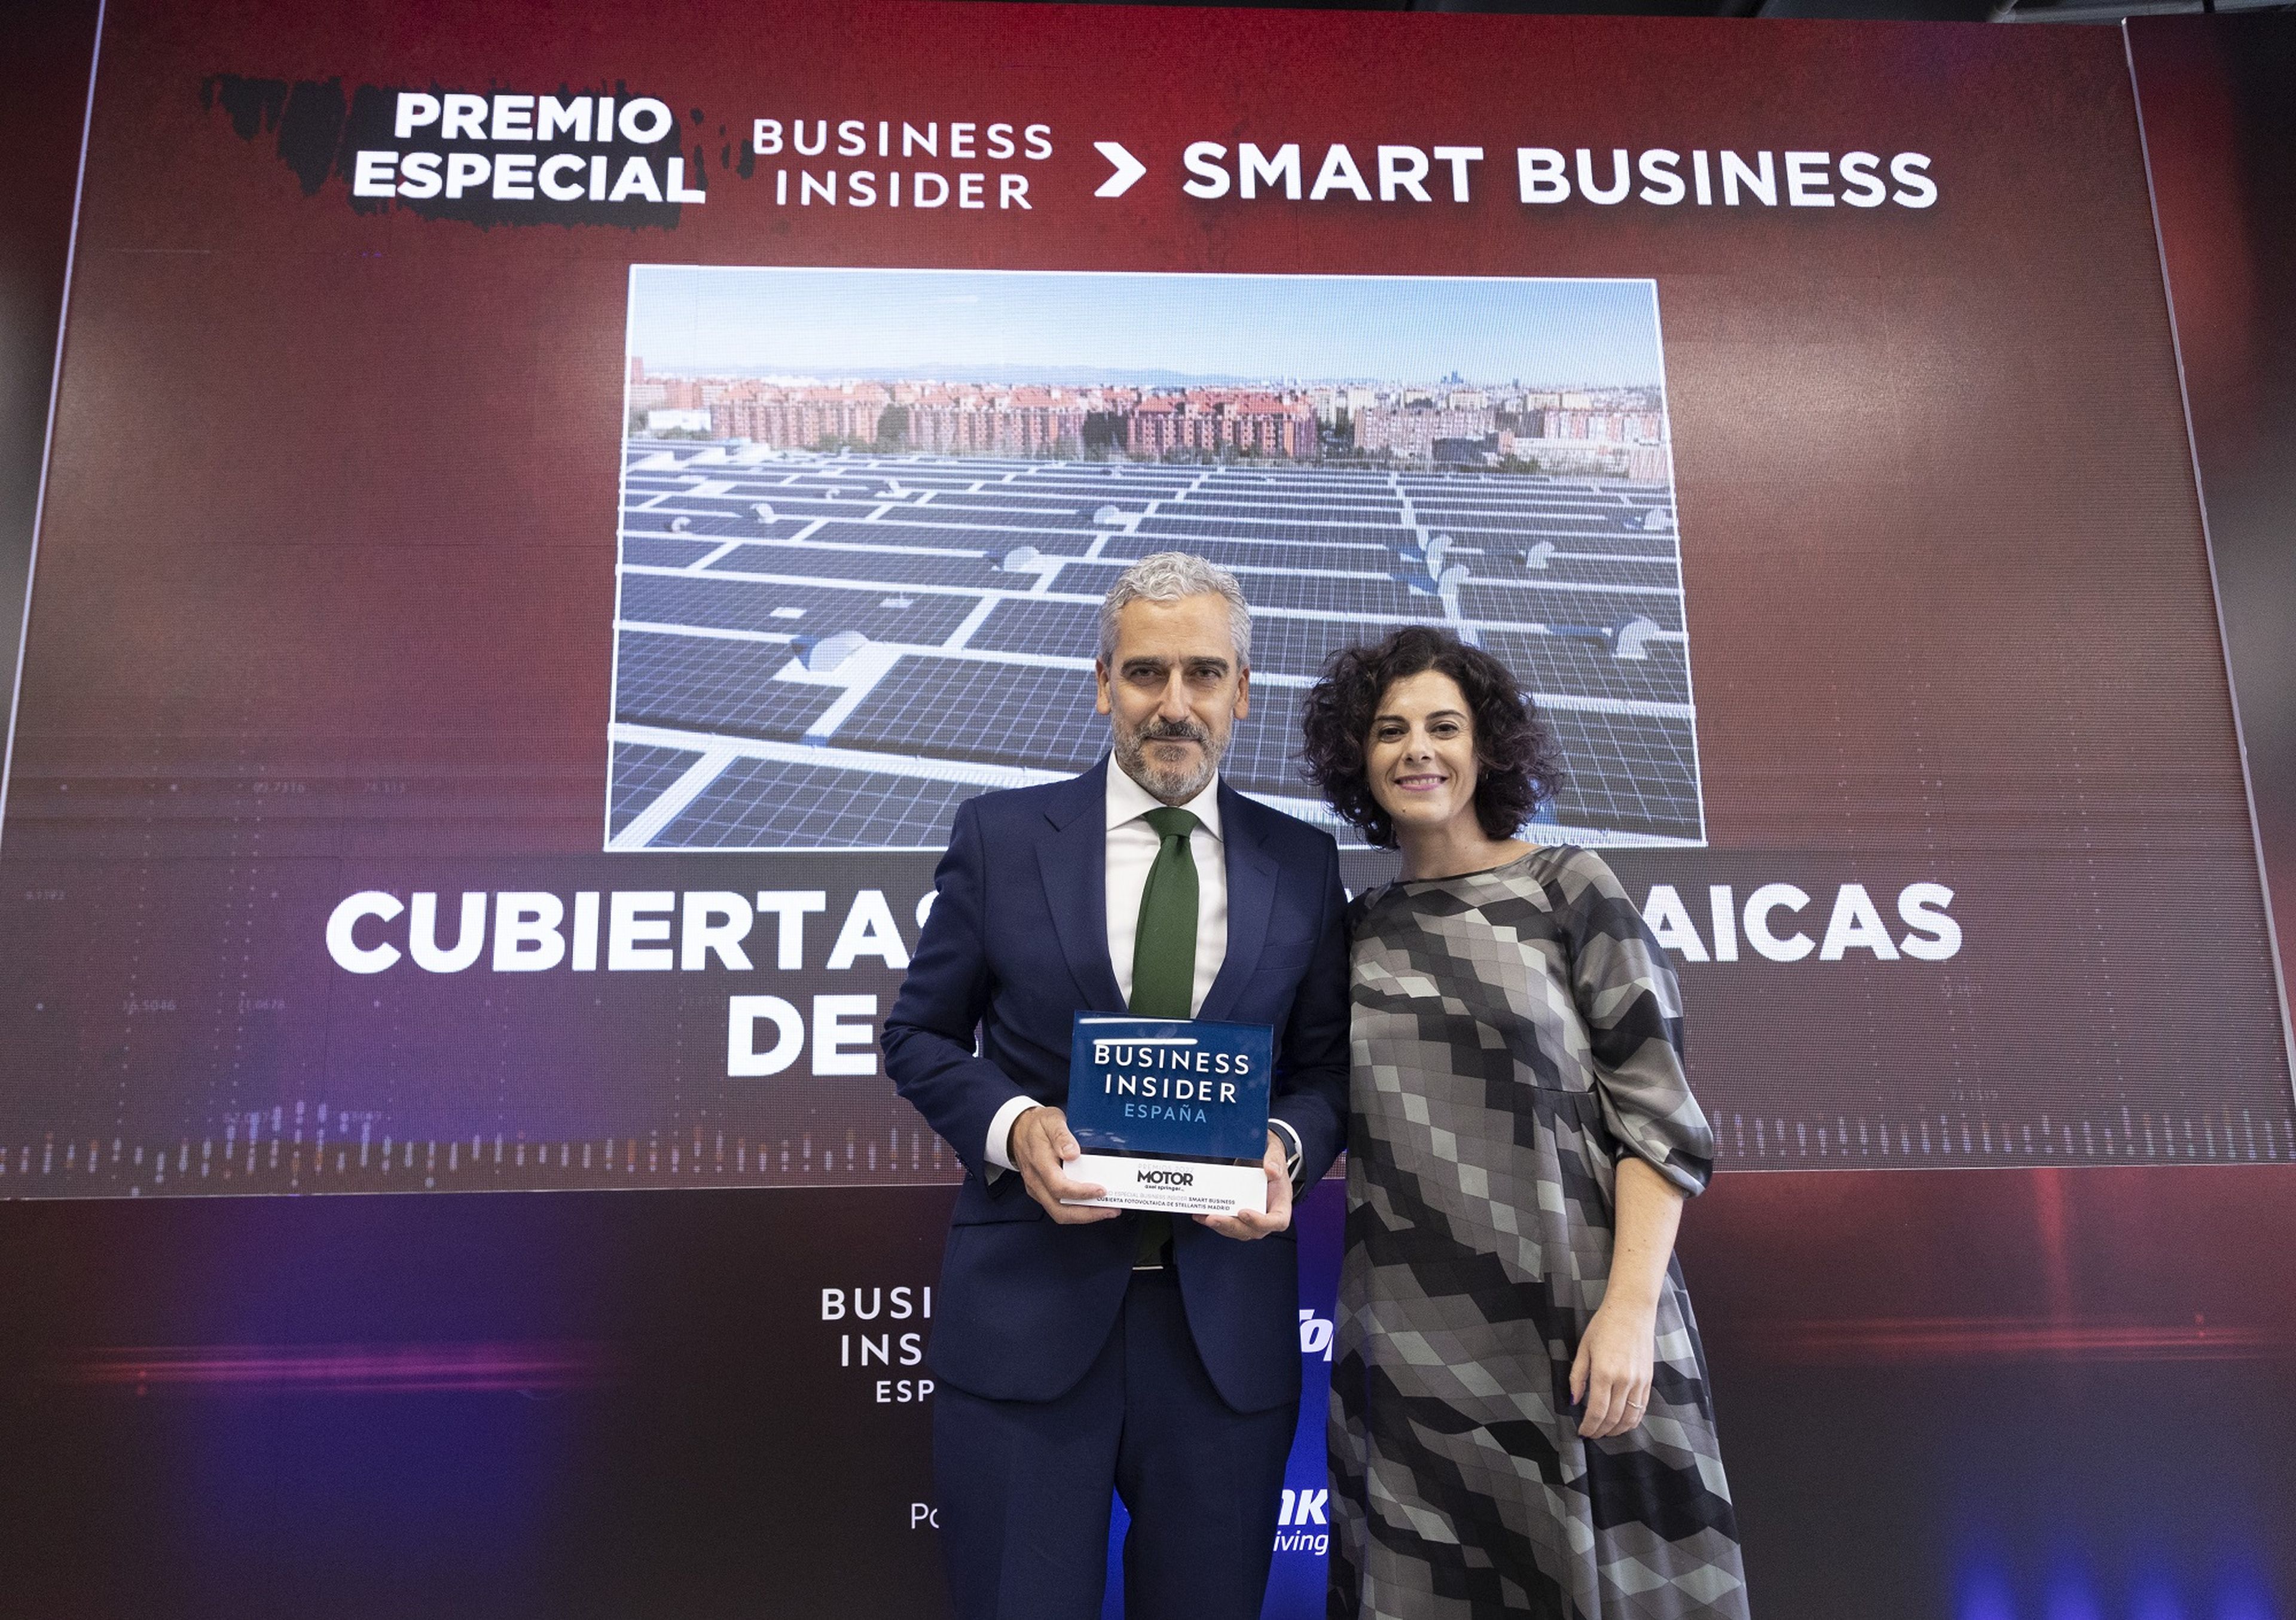 José Antonio León, director of Institutional Relations of Stellantis Iberia, received the award from Yovanna Blanco, director of 'Business Insider España'.